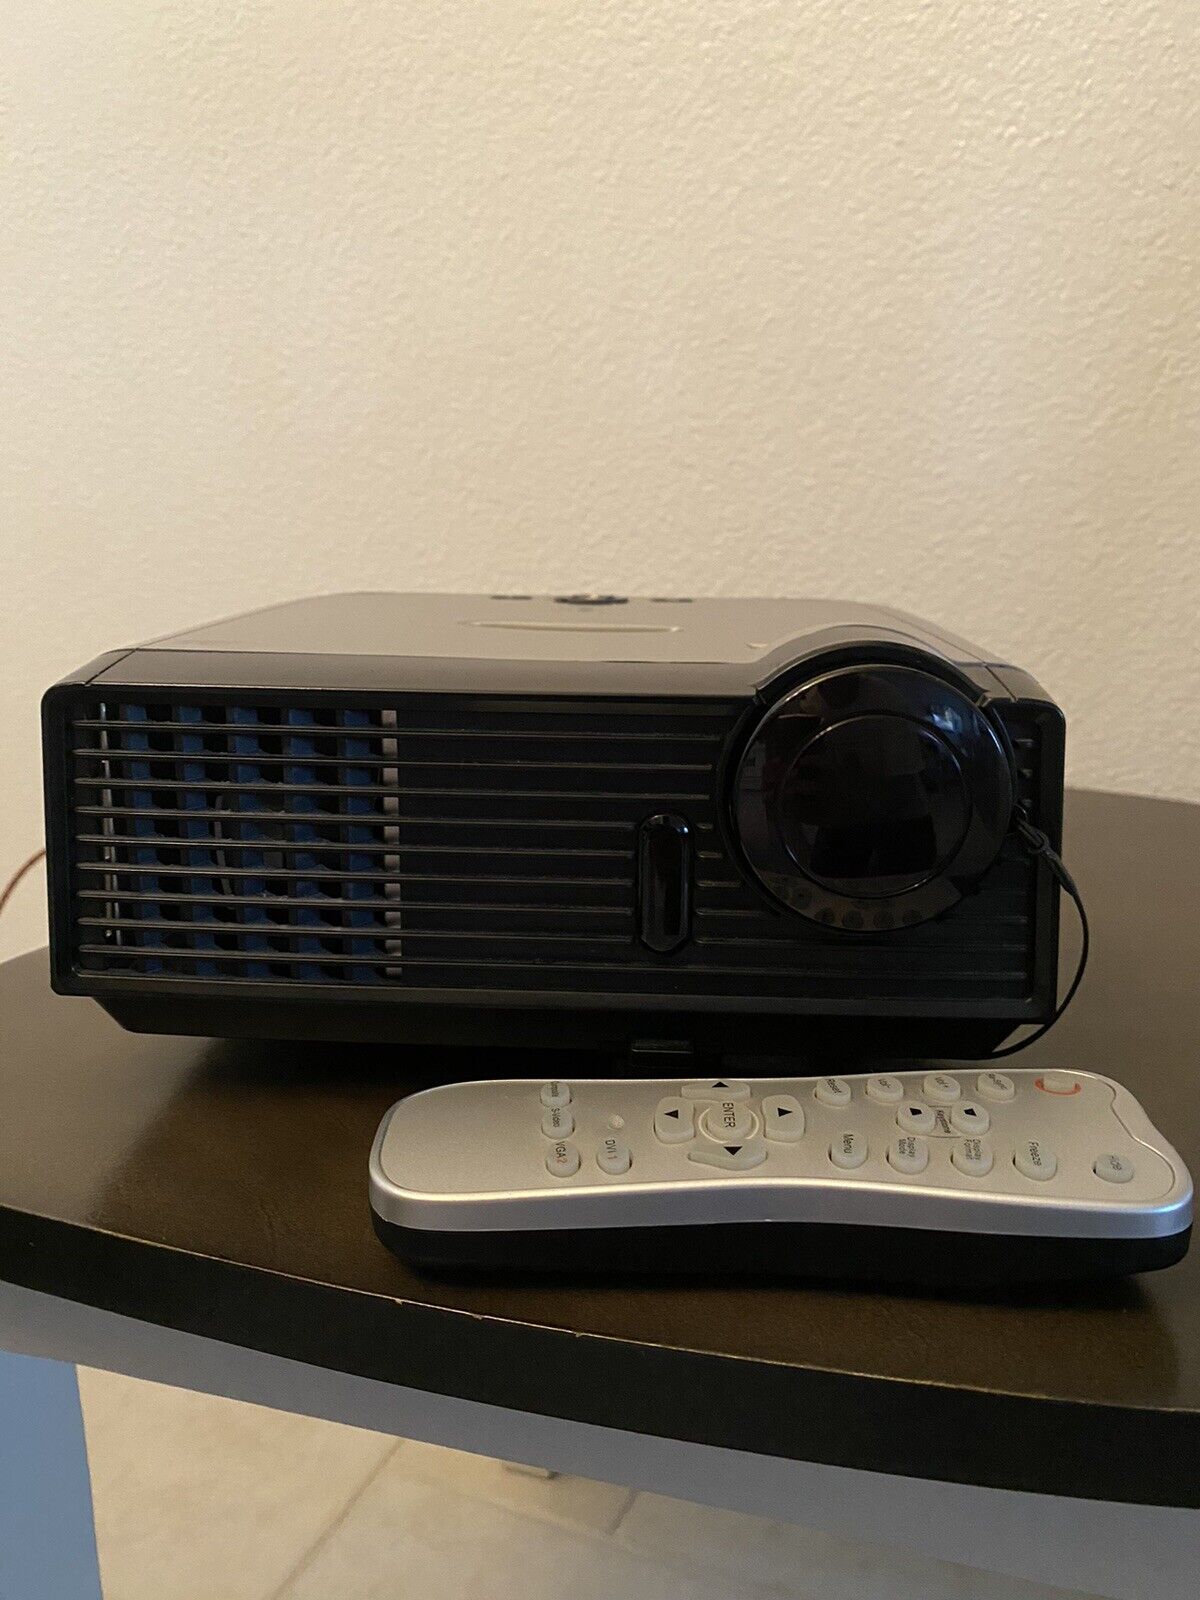 OPTOMA DX605R DLP PORTABLE PROJECTOR with Controller (No Cables) - NOT TESTED